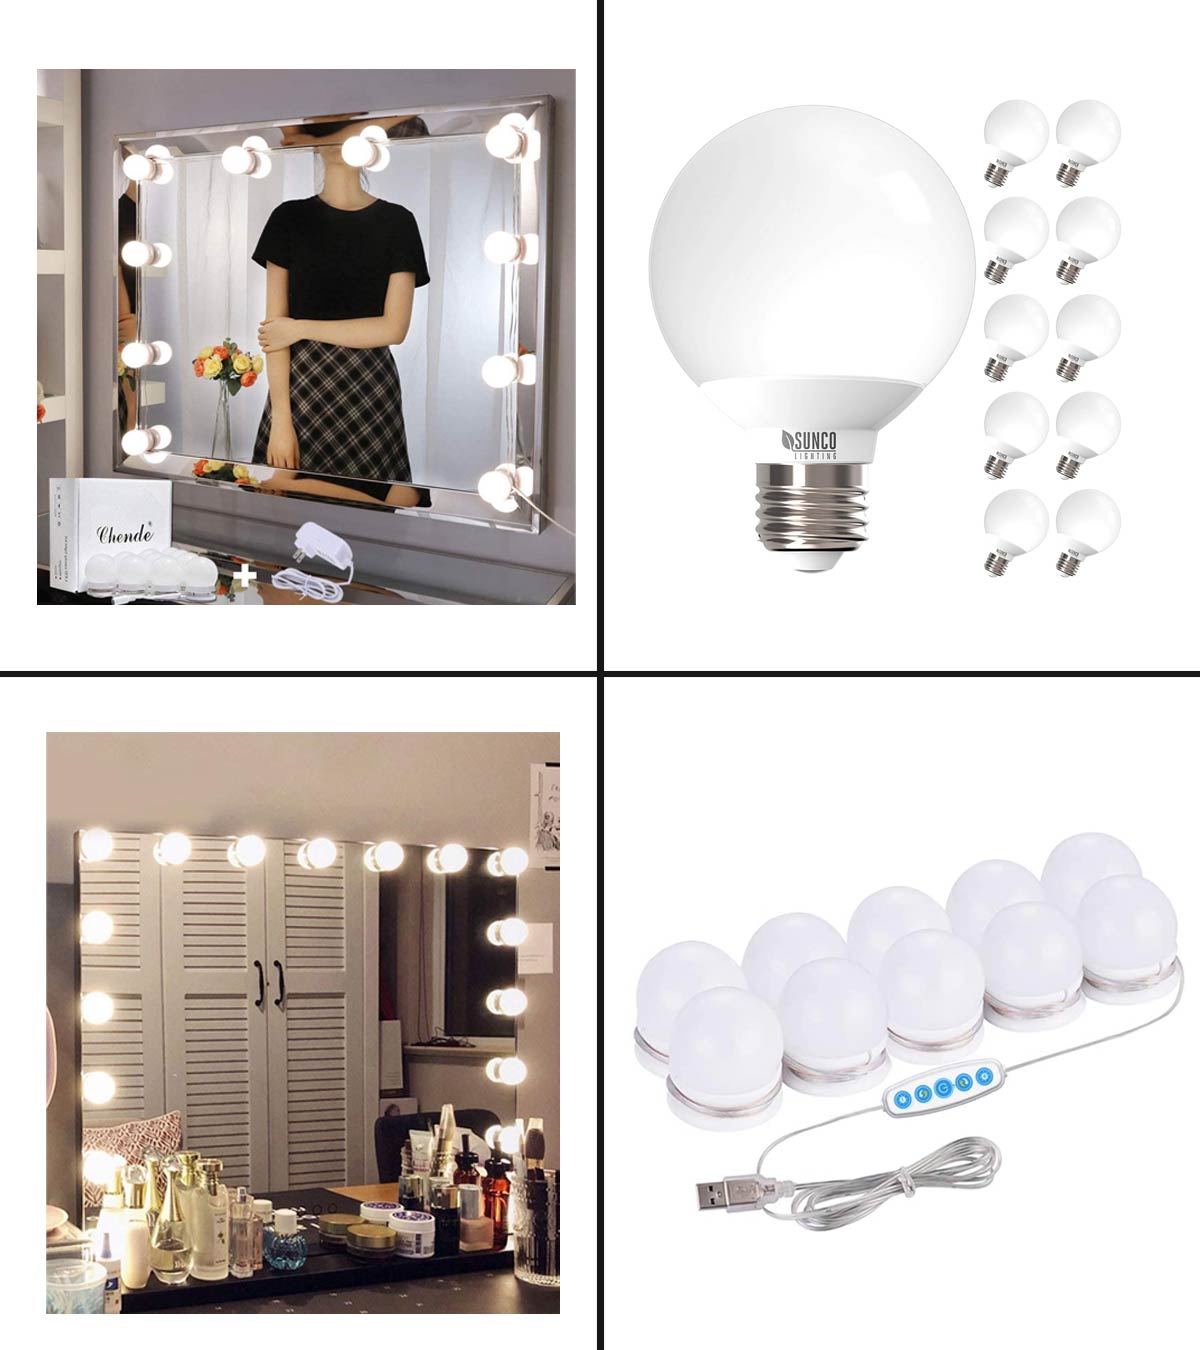 Hollywood Style LED Vanity Mirror Lights Kits 3 Color 10 Dimmable Bulbs  Lighting Fixture Strip For Makeup Dressing Vanity Light